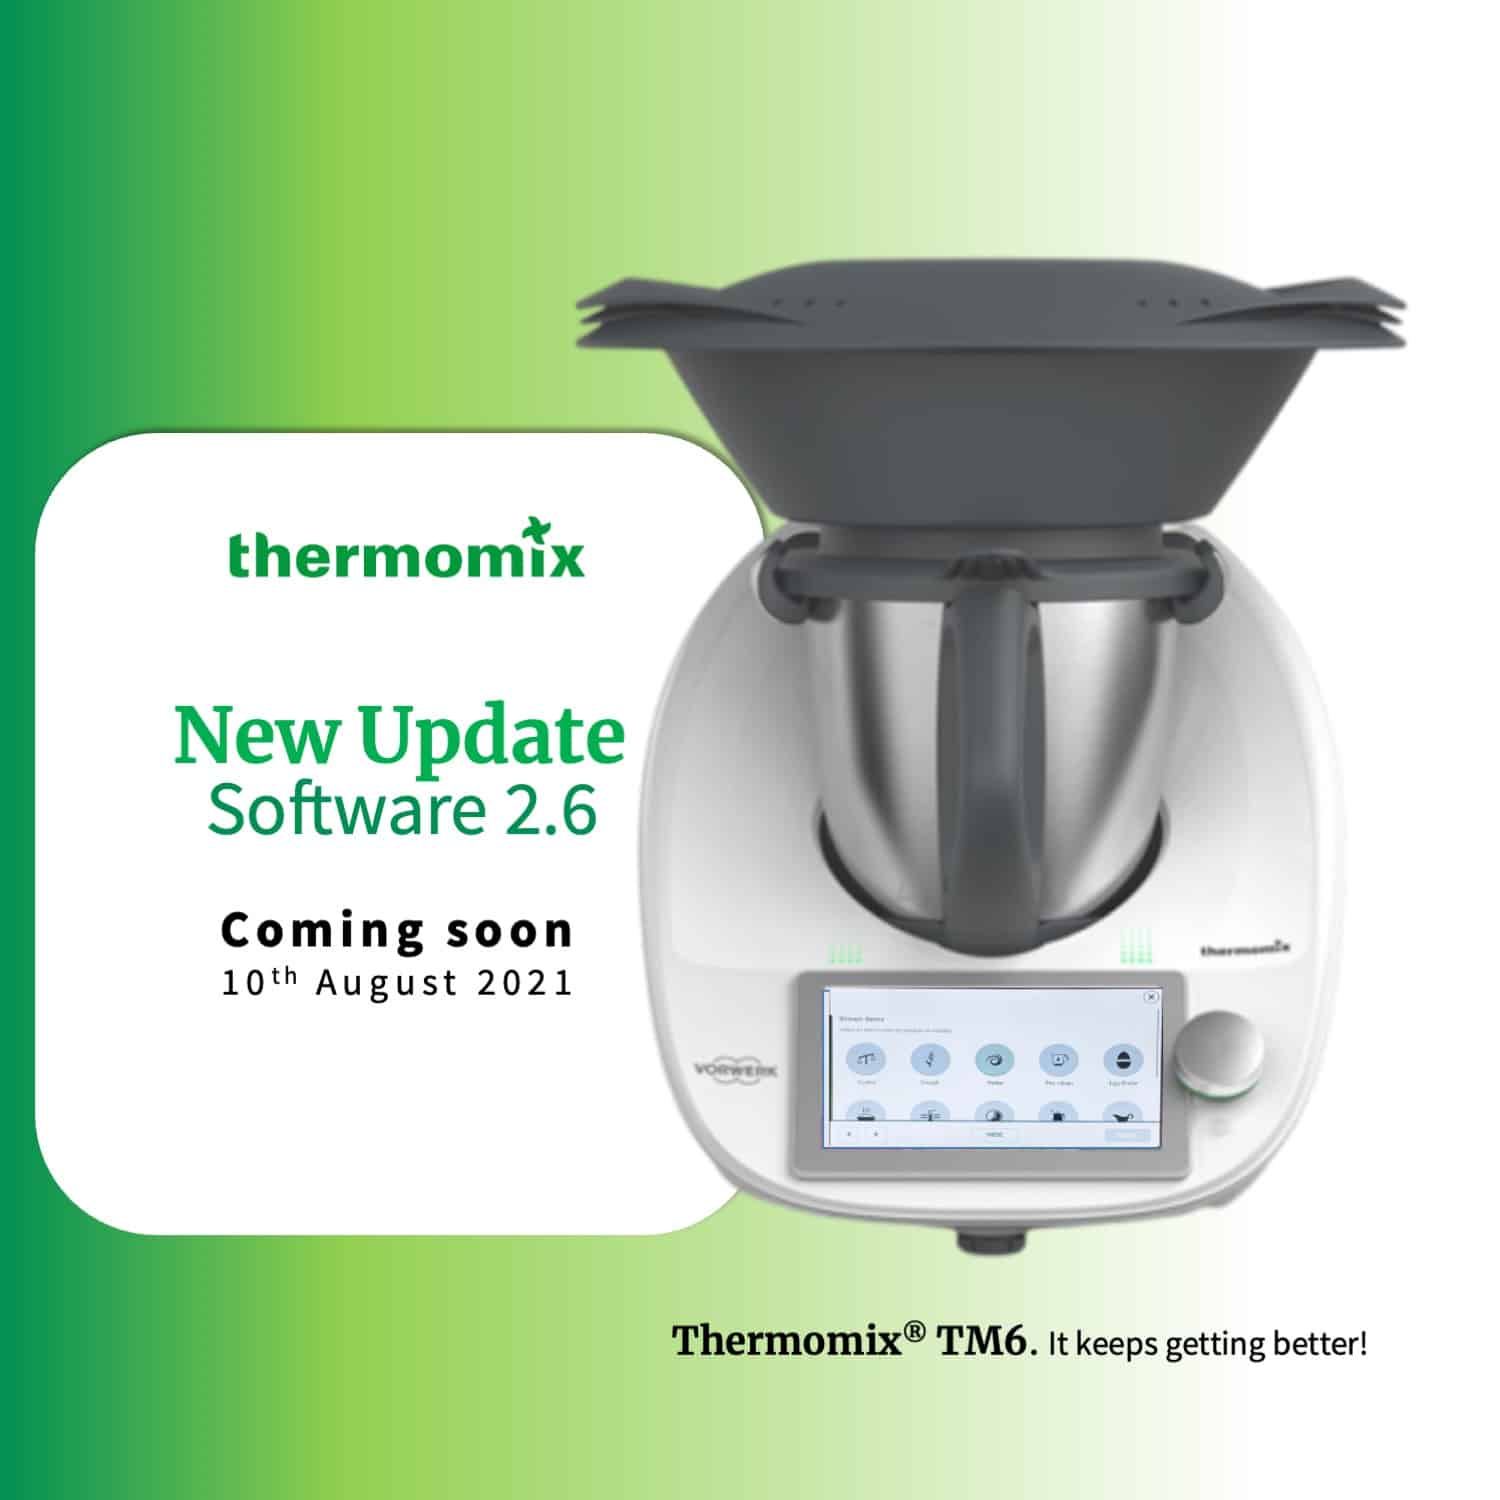 Thermomix TM6 New Software 2.6 Update